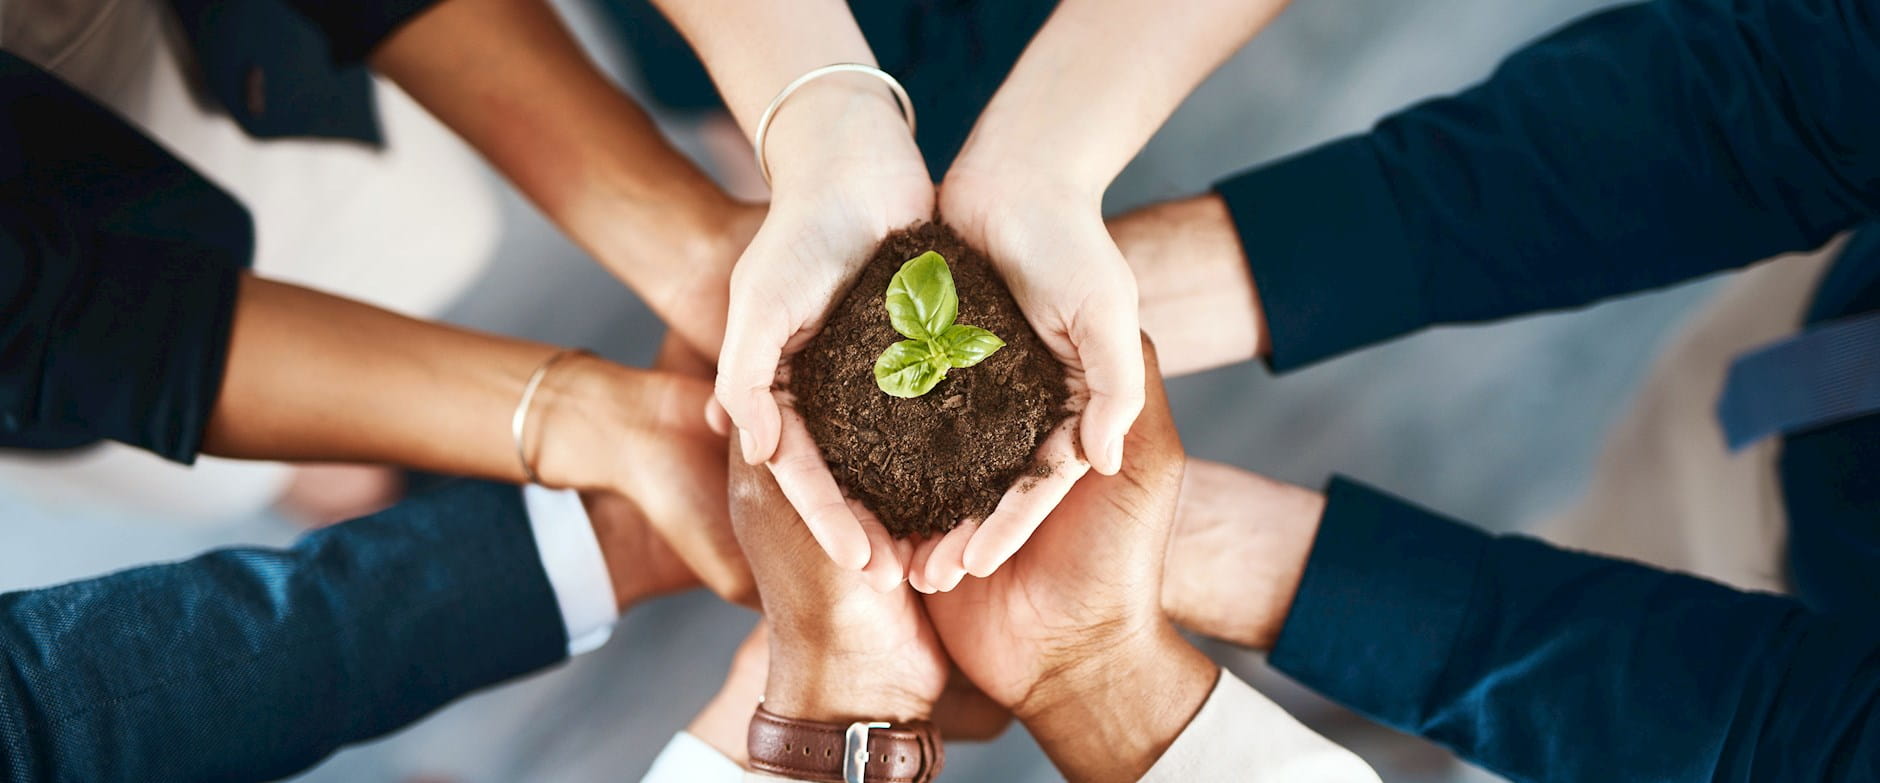 Businesspeople's arms form a circle around a person cupping a growing green plant in soil